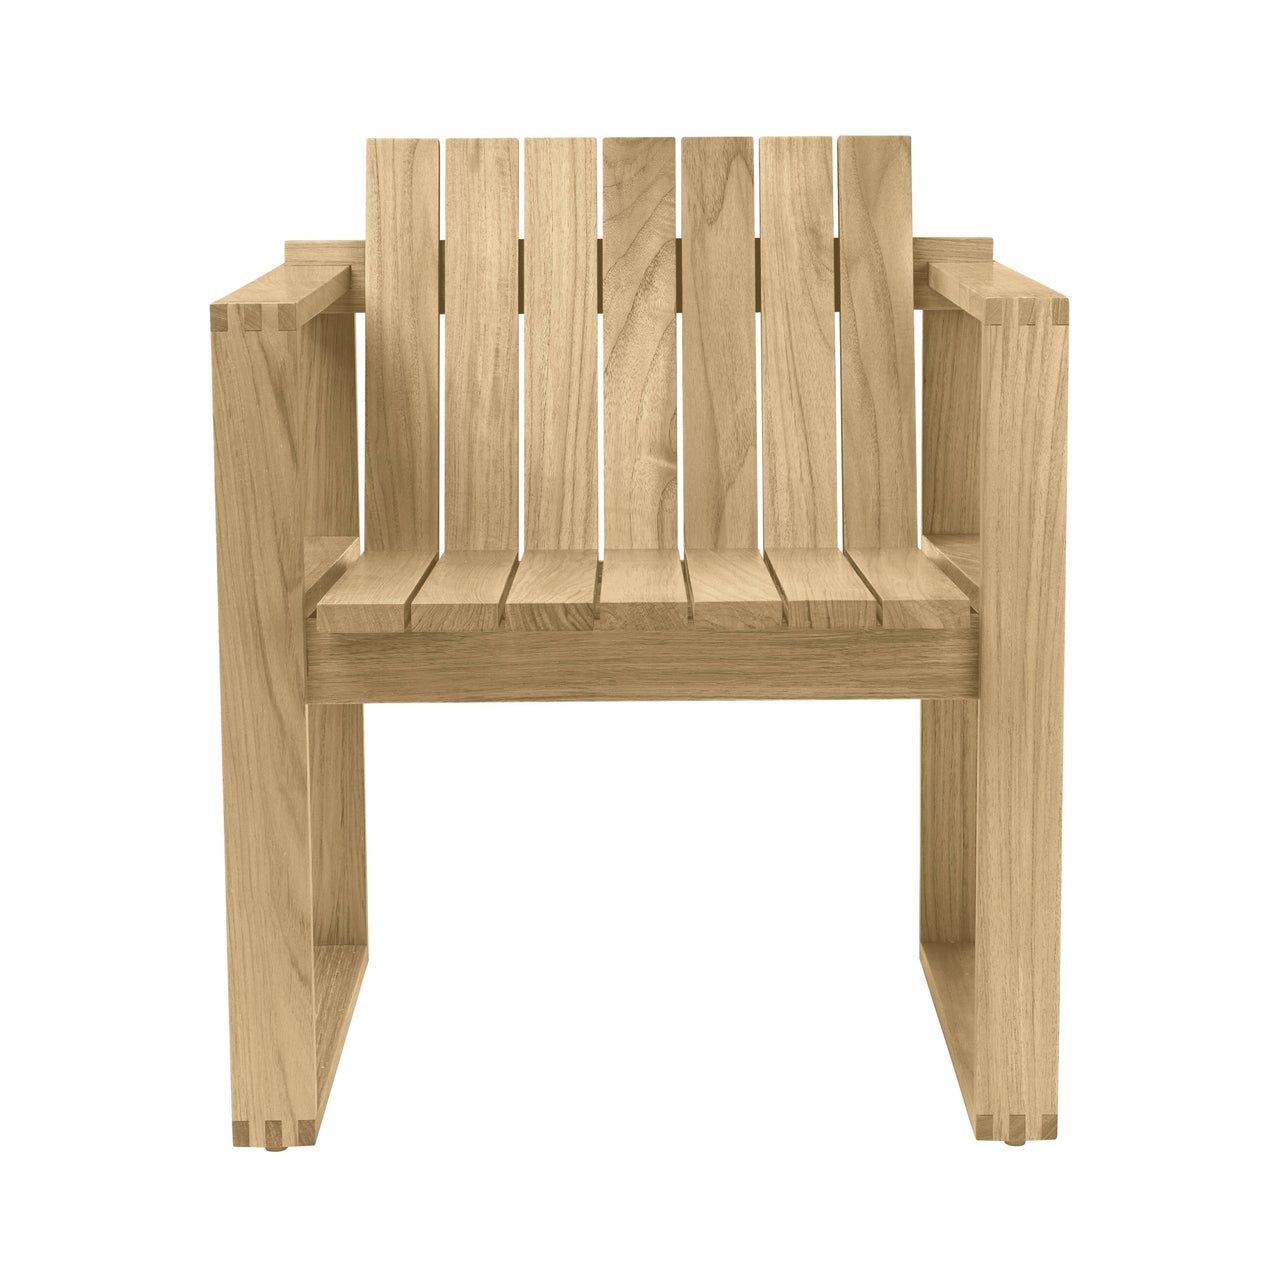 BK10 Outdoor Dining Chair: Without Cushion